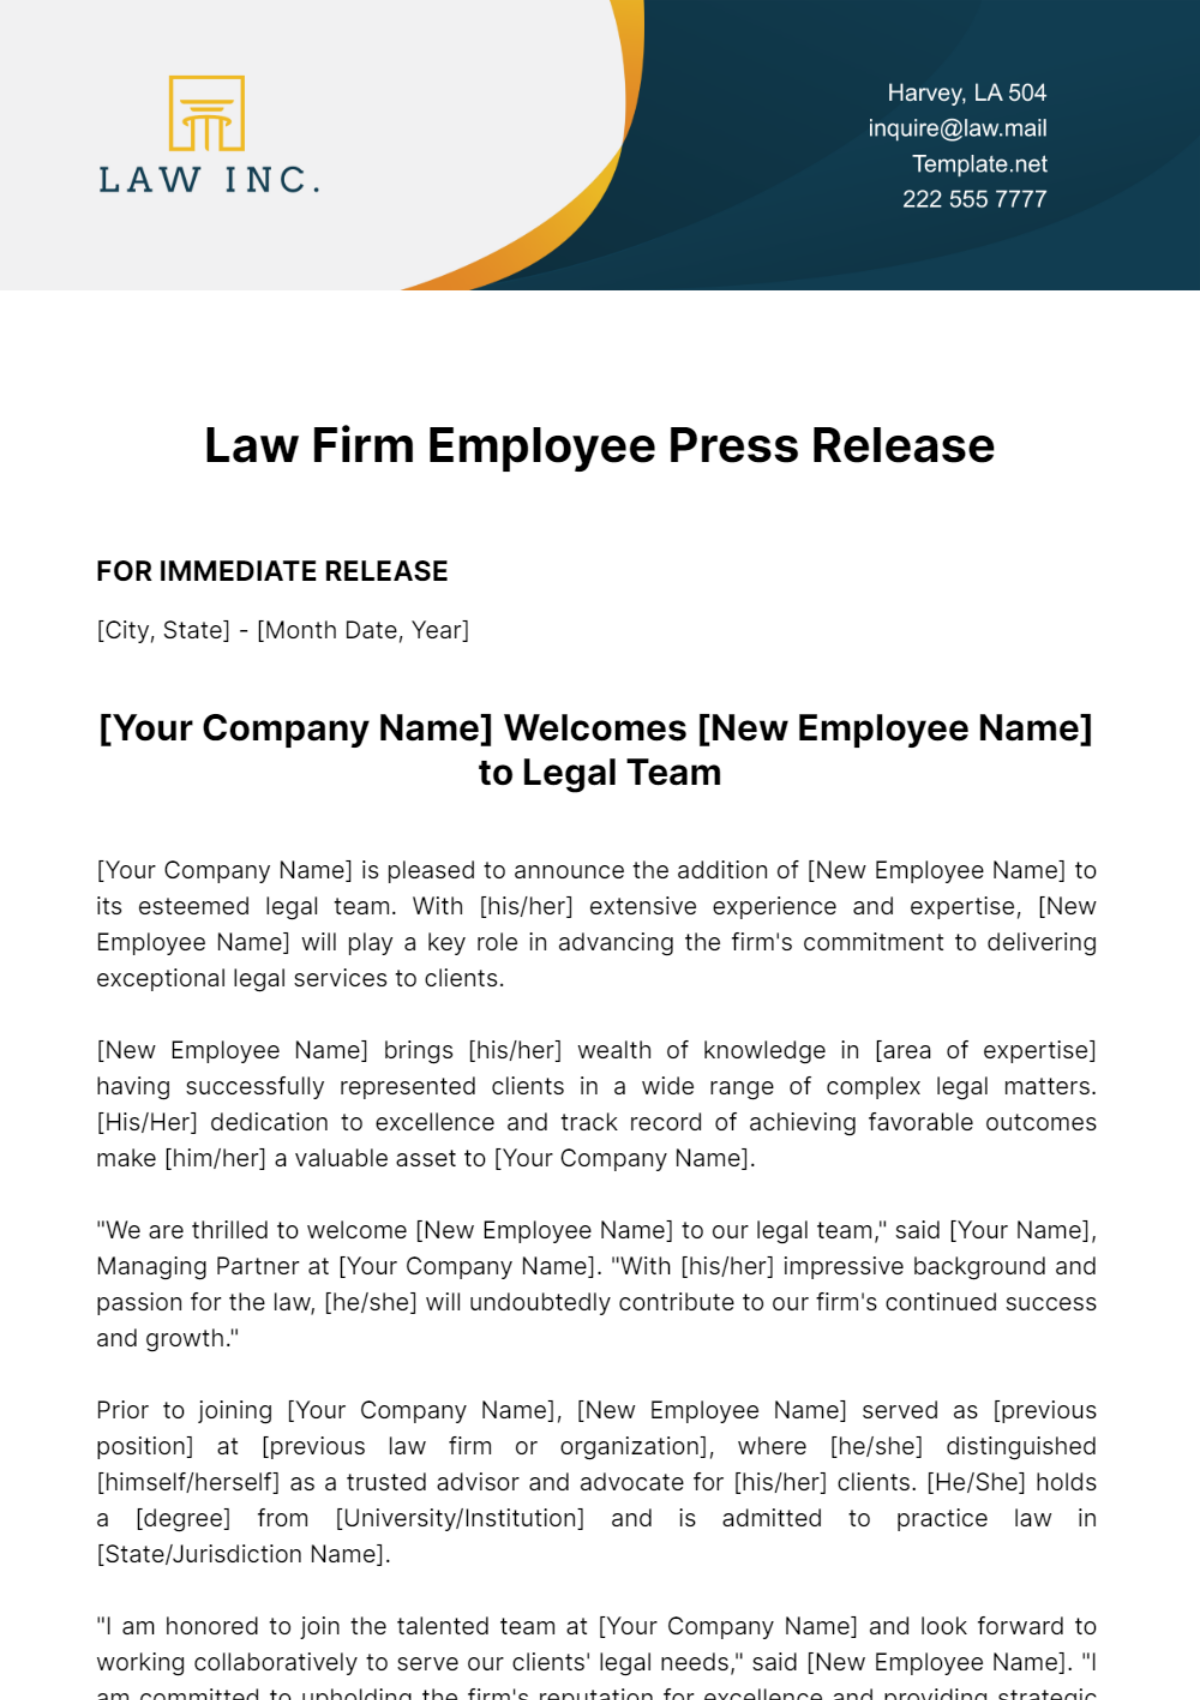 Law Firm Employee Press Release Template